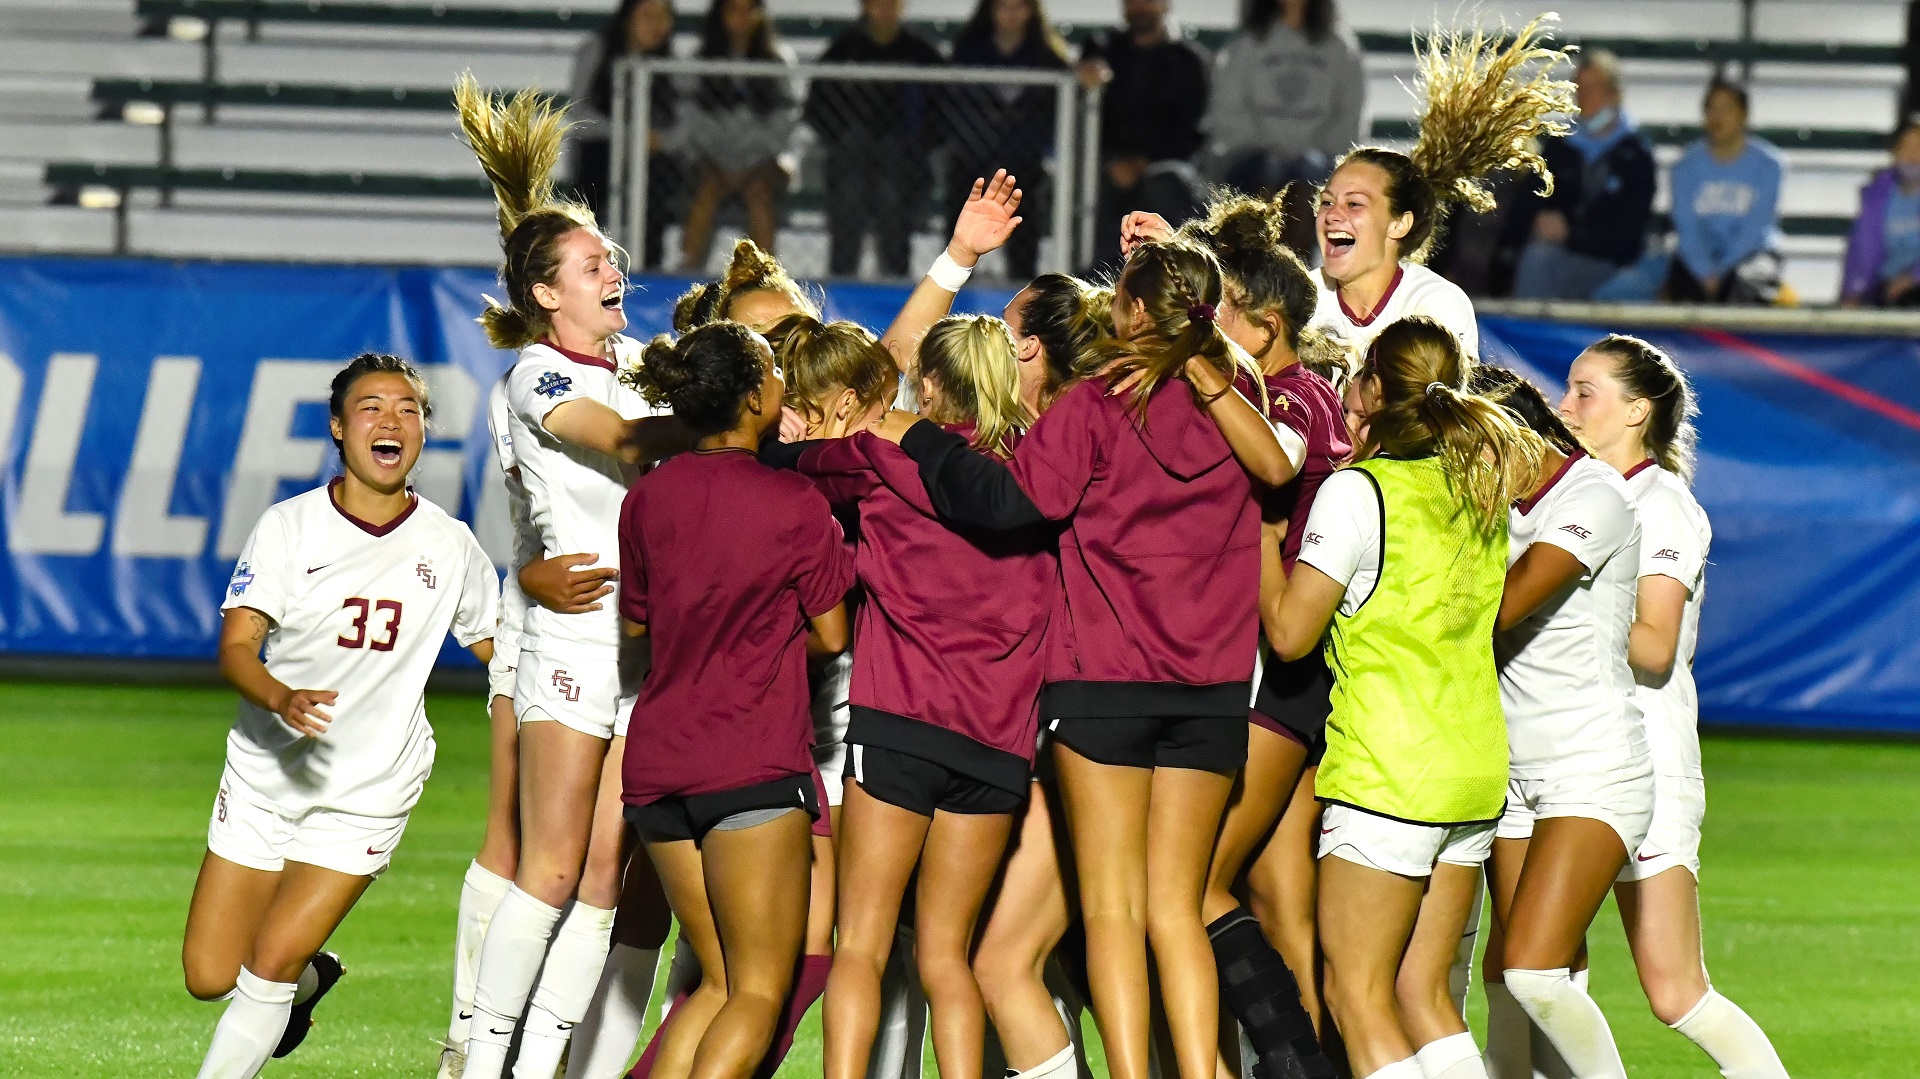 Florida State advances to NCAA Women's College Cup Final, beating UVA